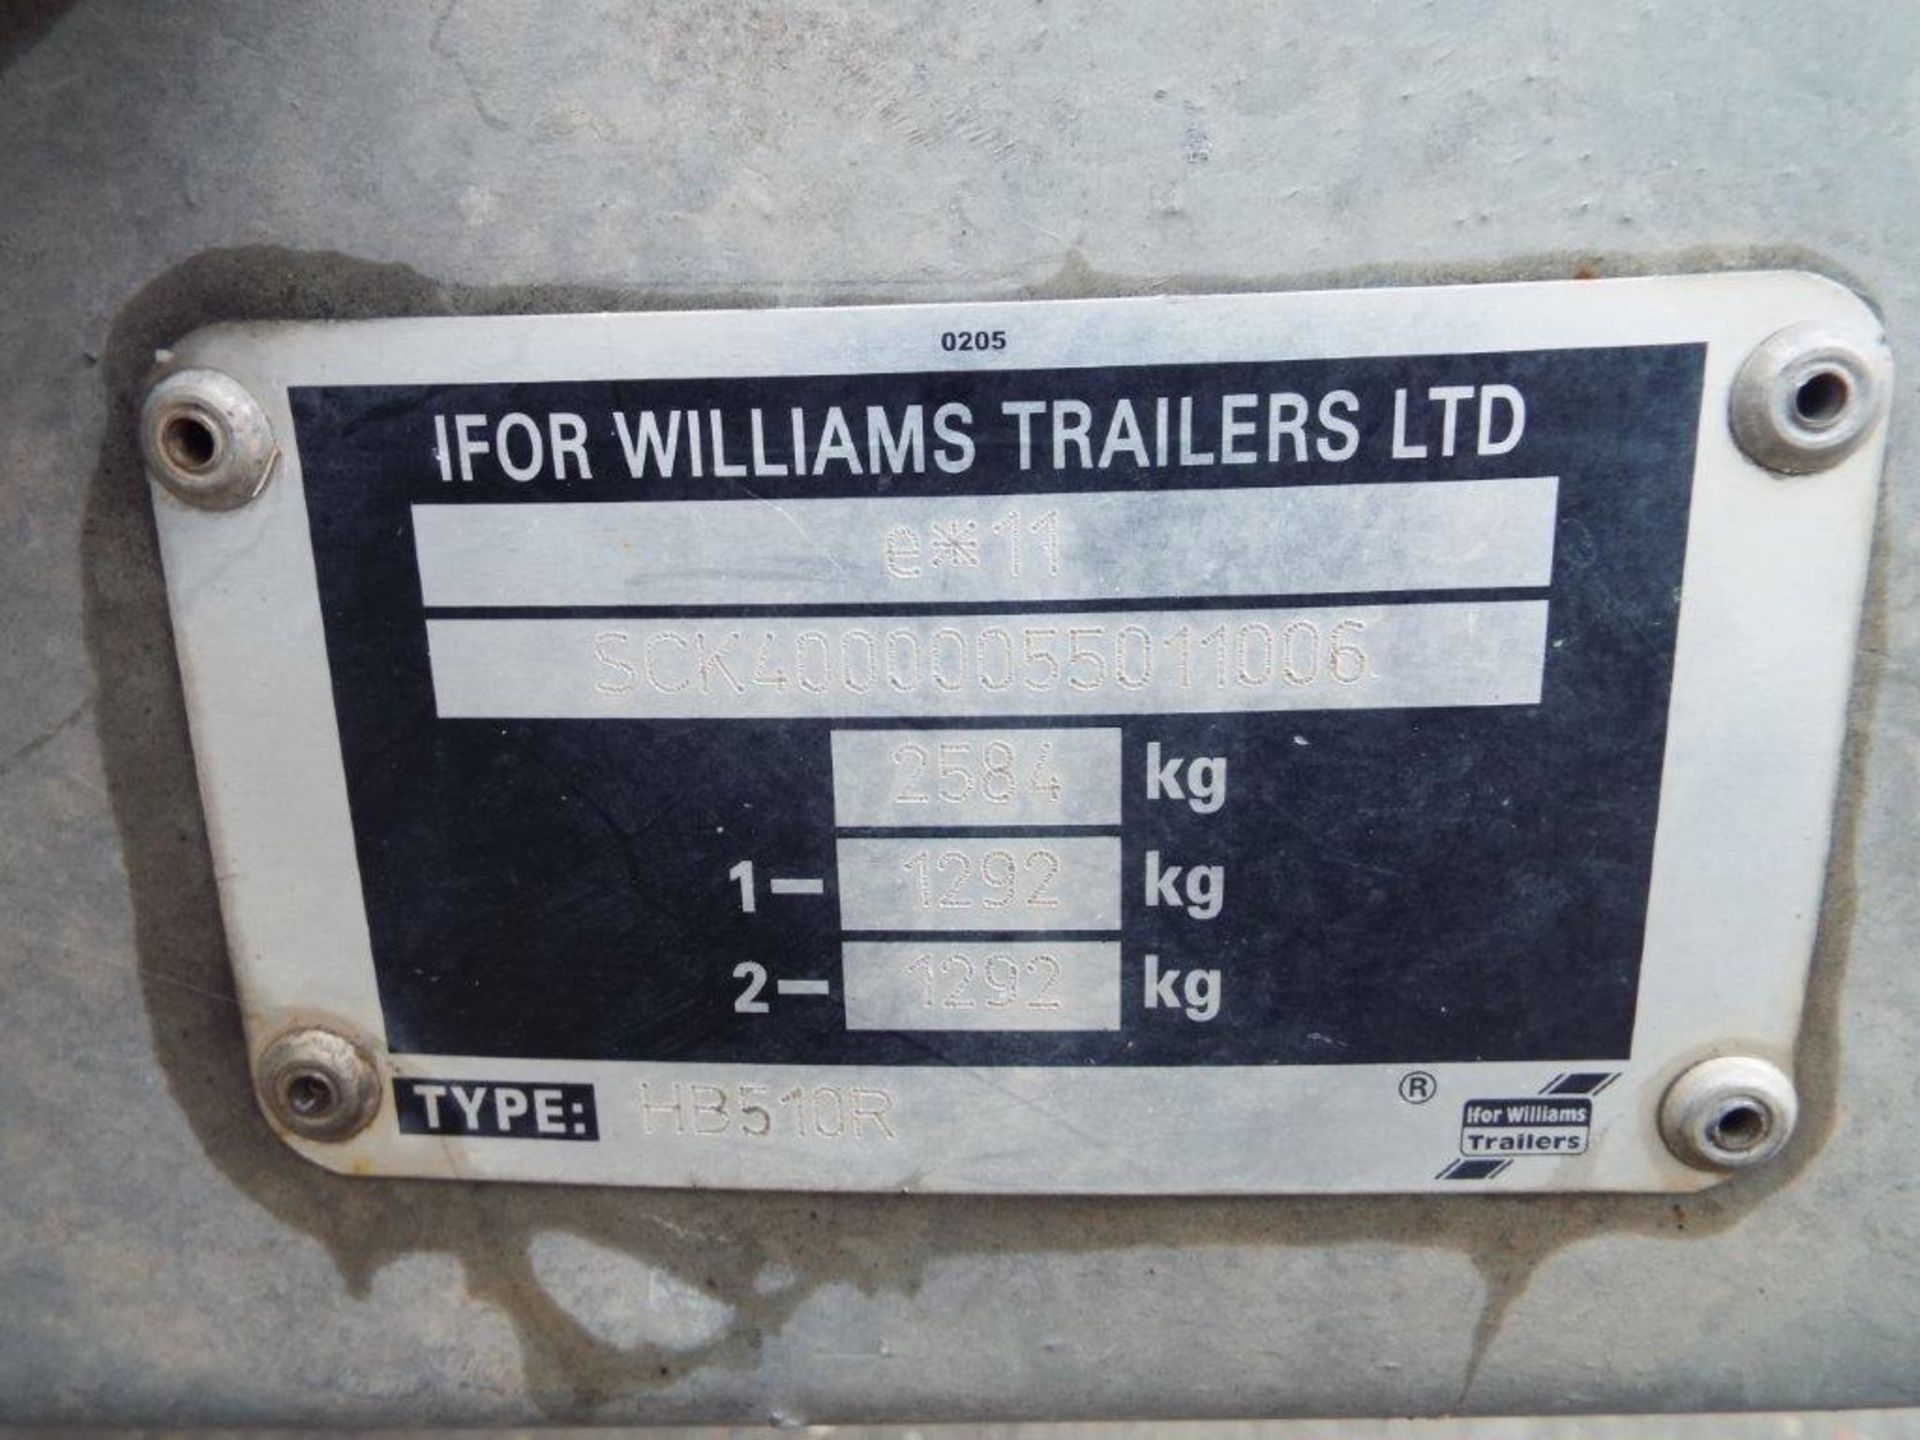 Ifor Williams HB510 Twin Axle 2 Horse Trailer - Image 23 of 25